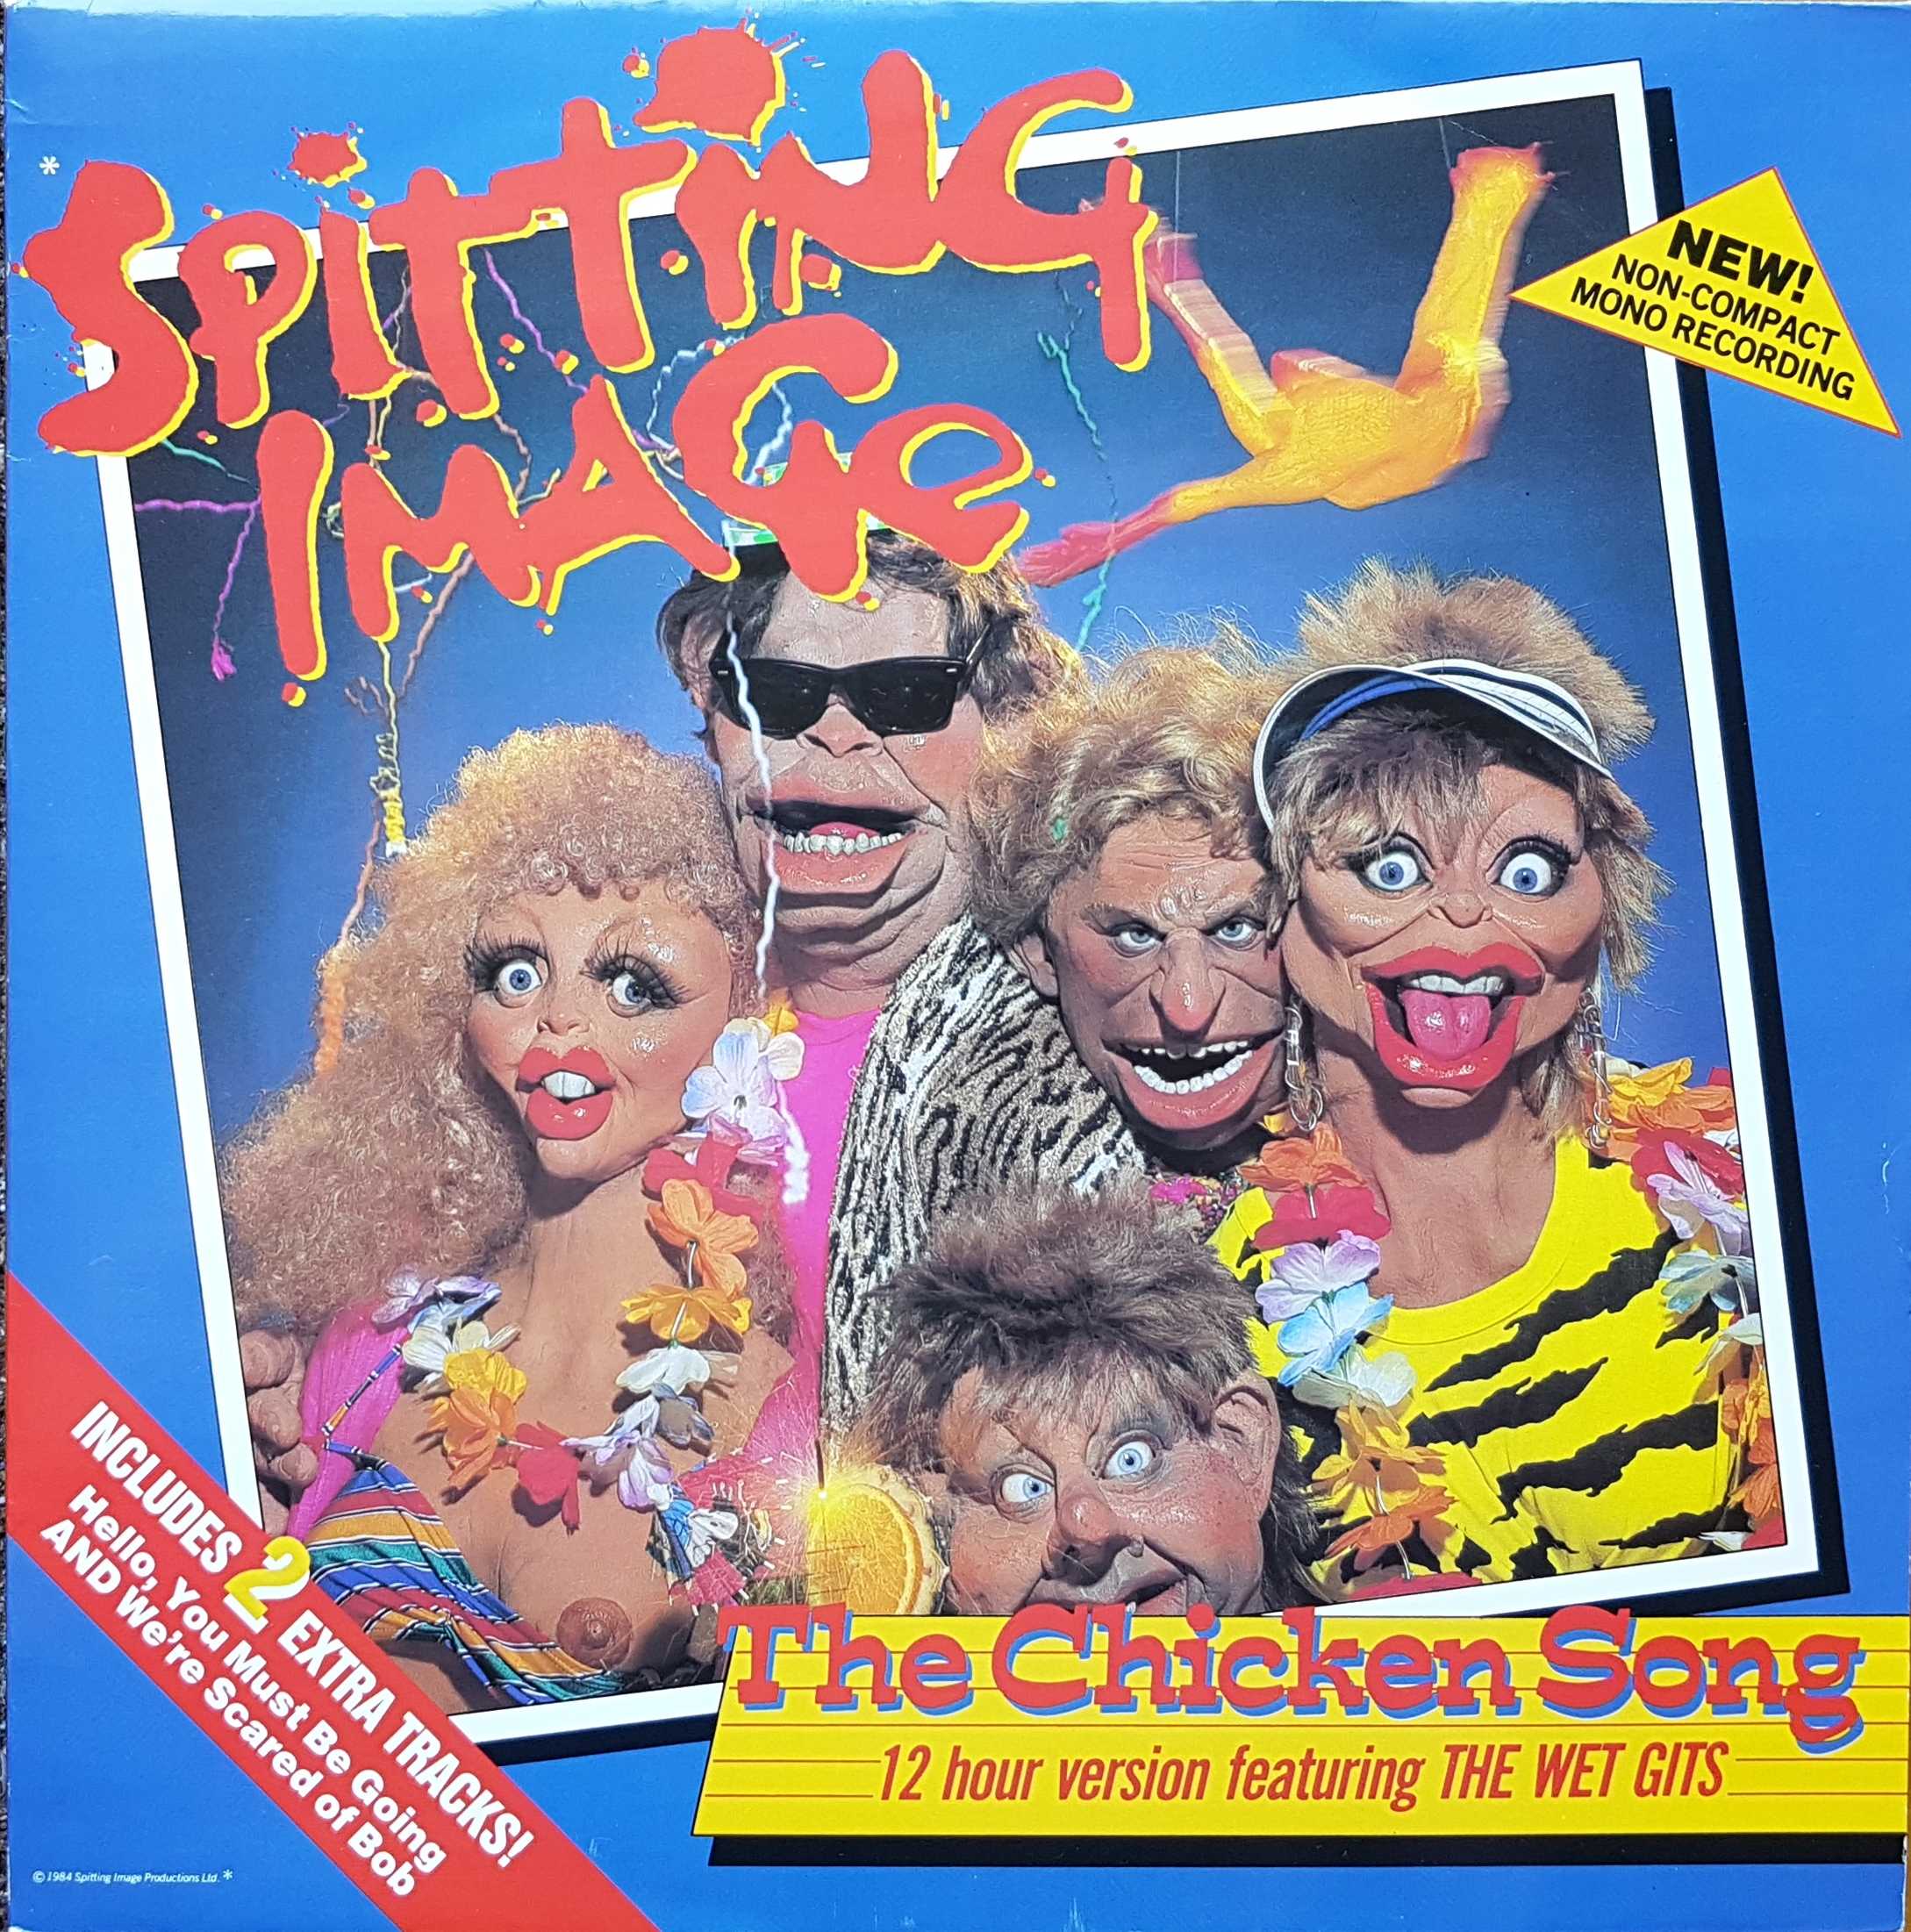 Picture of SPIT 112 The chicken song (Spitting image) by artist Pope / Grant / Naylor from ITV, Channel 4 and Channel 5 library